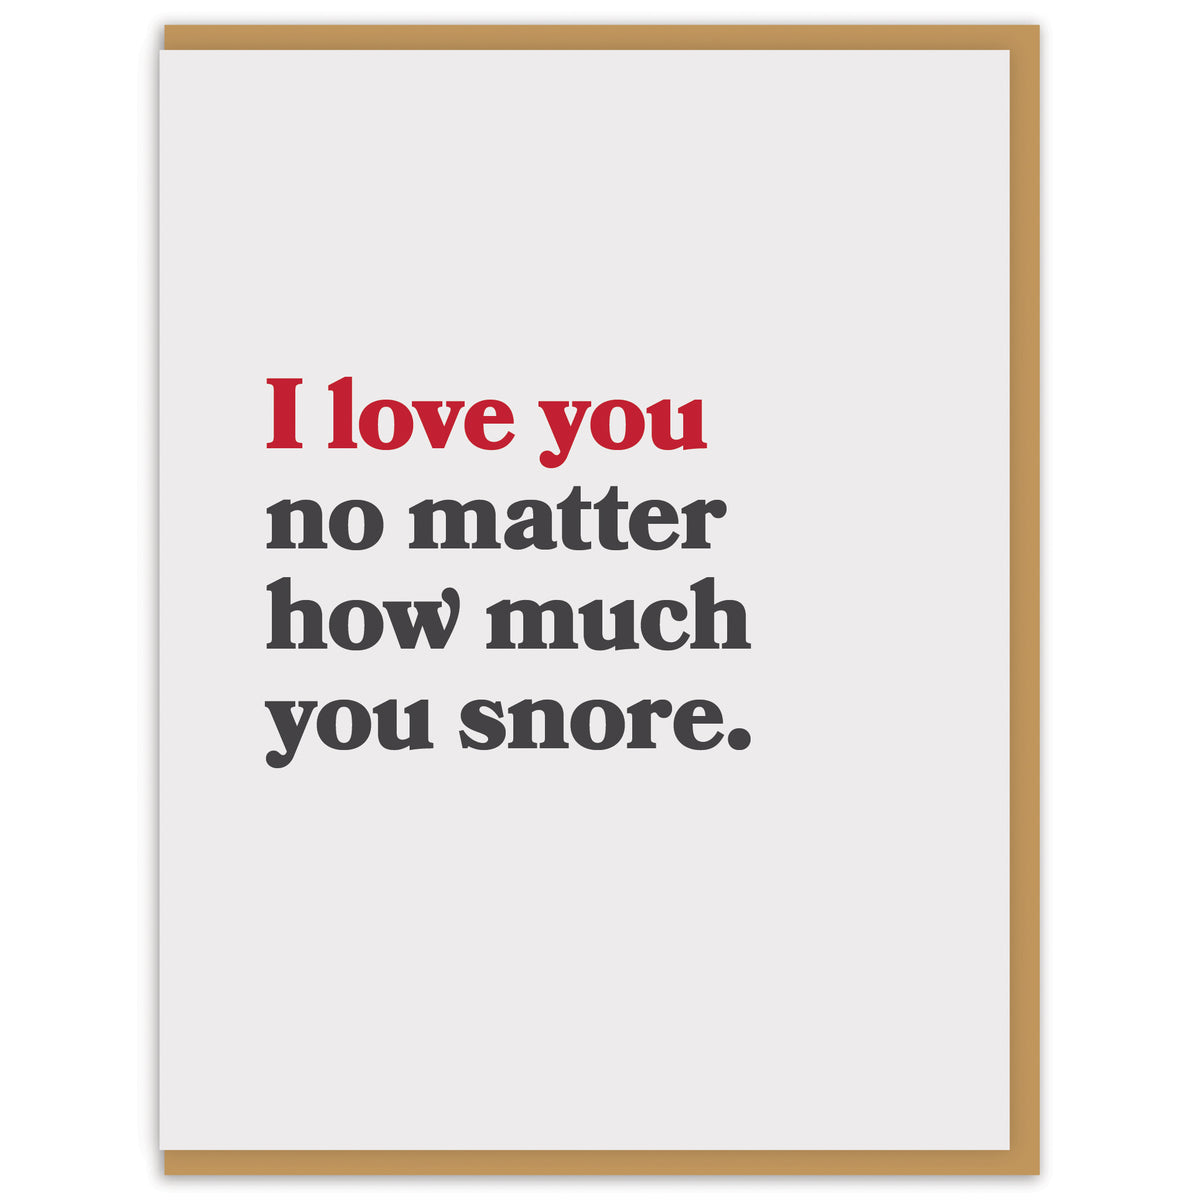 I love you no matter how much you snore.